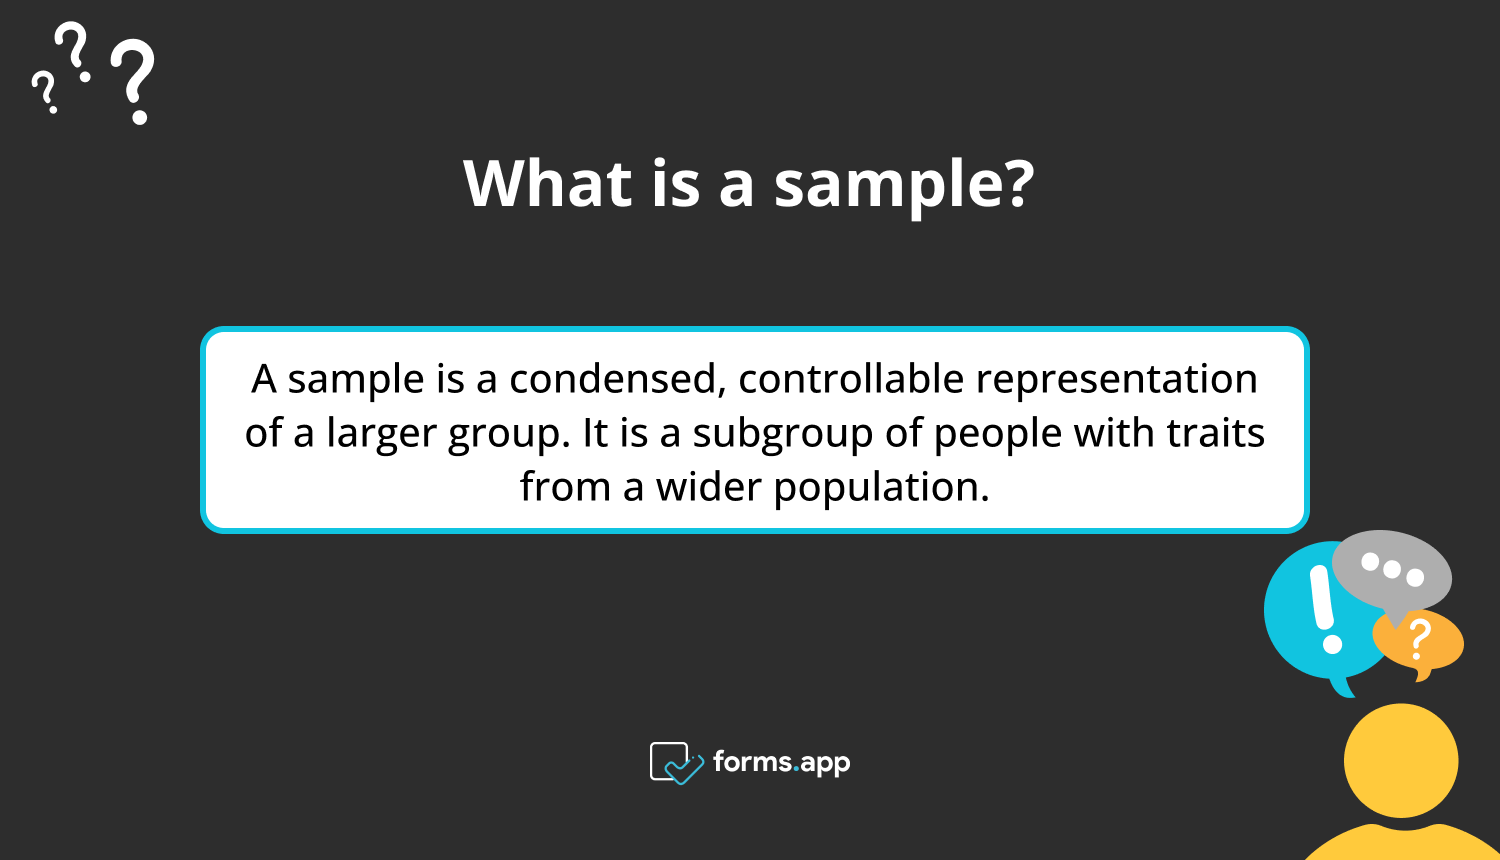 The definition of a sample